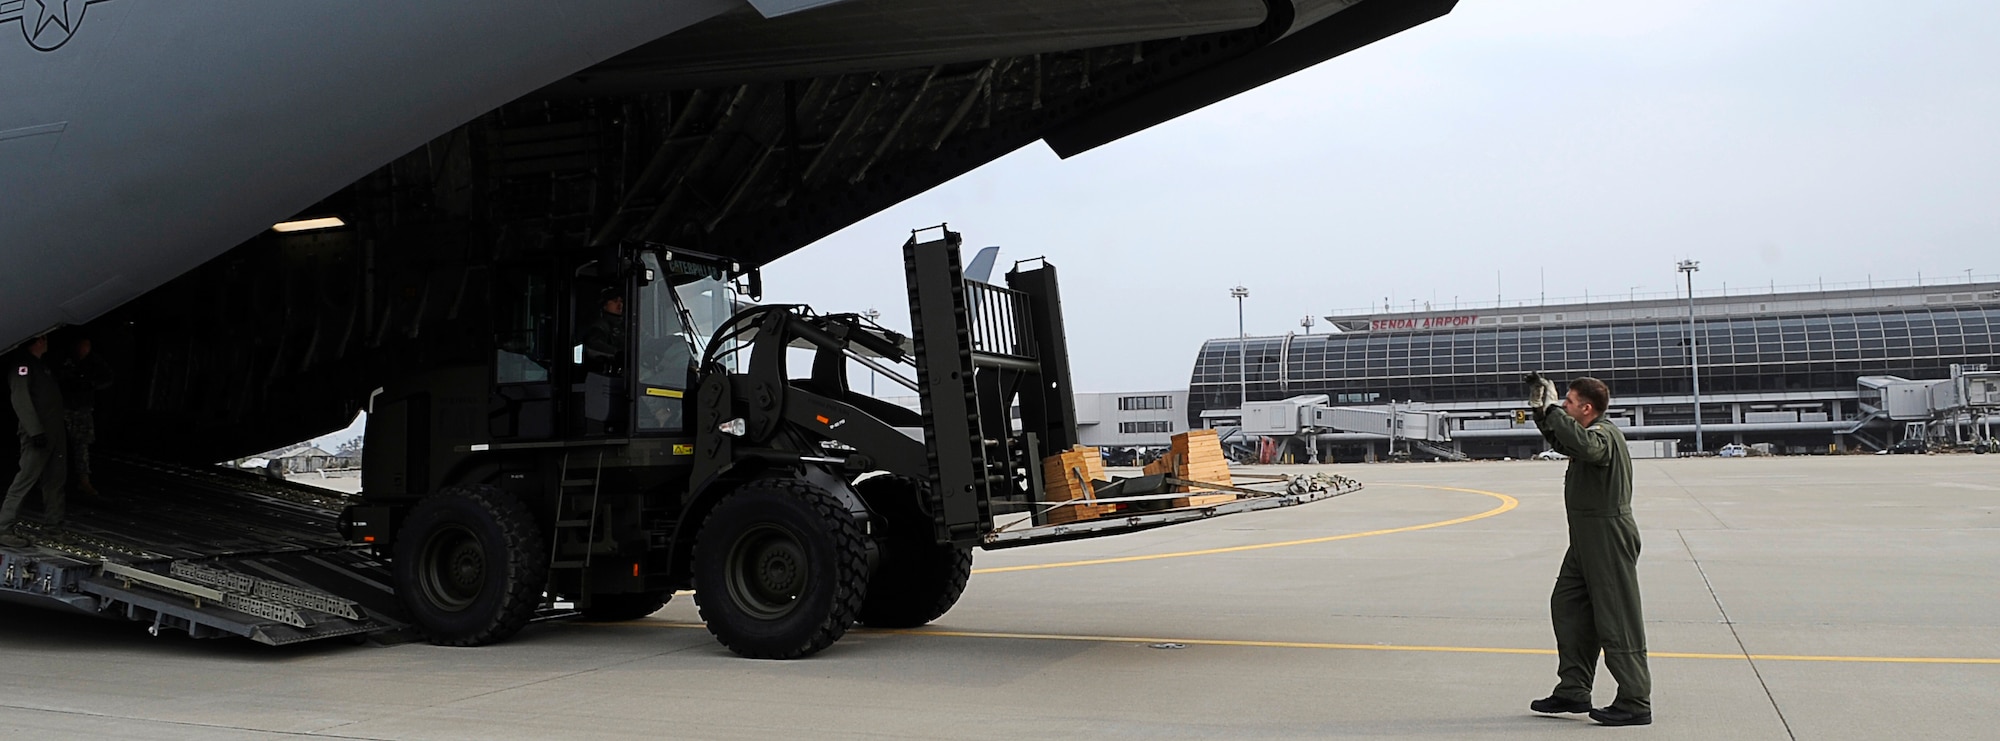 SENDAI AIRPORT, Japan -- U.S. Air Force Airmen from Yokota, Air Base unload rolling stock from a C-17 Globemaster III aircraft March 20. This was the first C-17 to land here after the tsunami. (U.S. Air Force photo by/ Master Sgt. Jeromy K. Cross/Released)